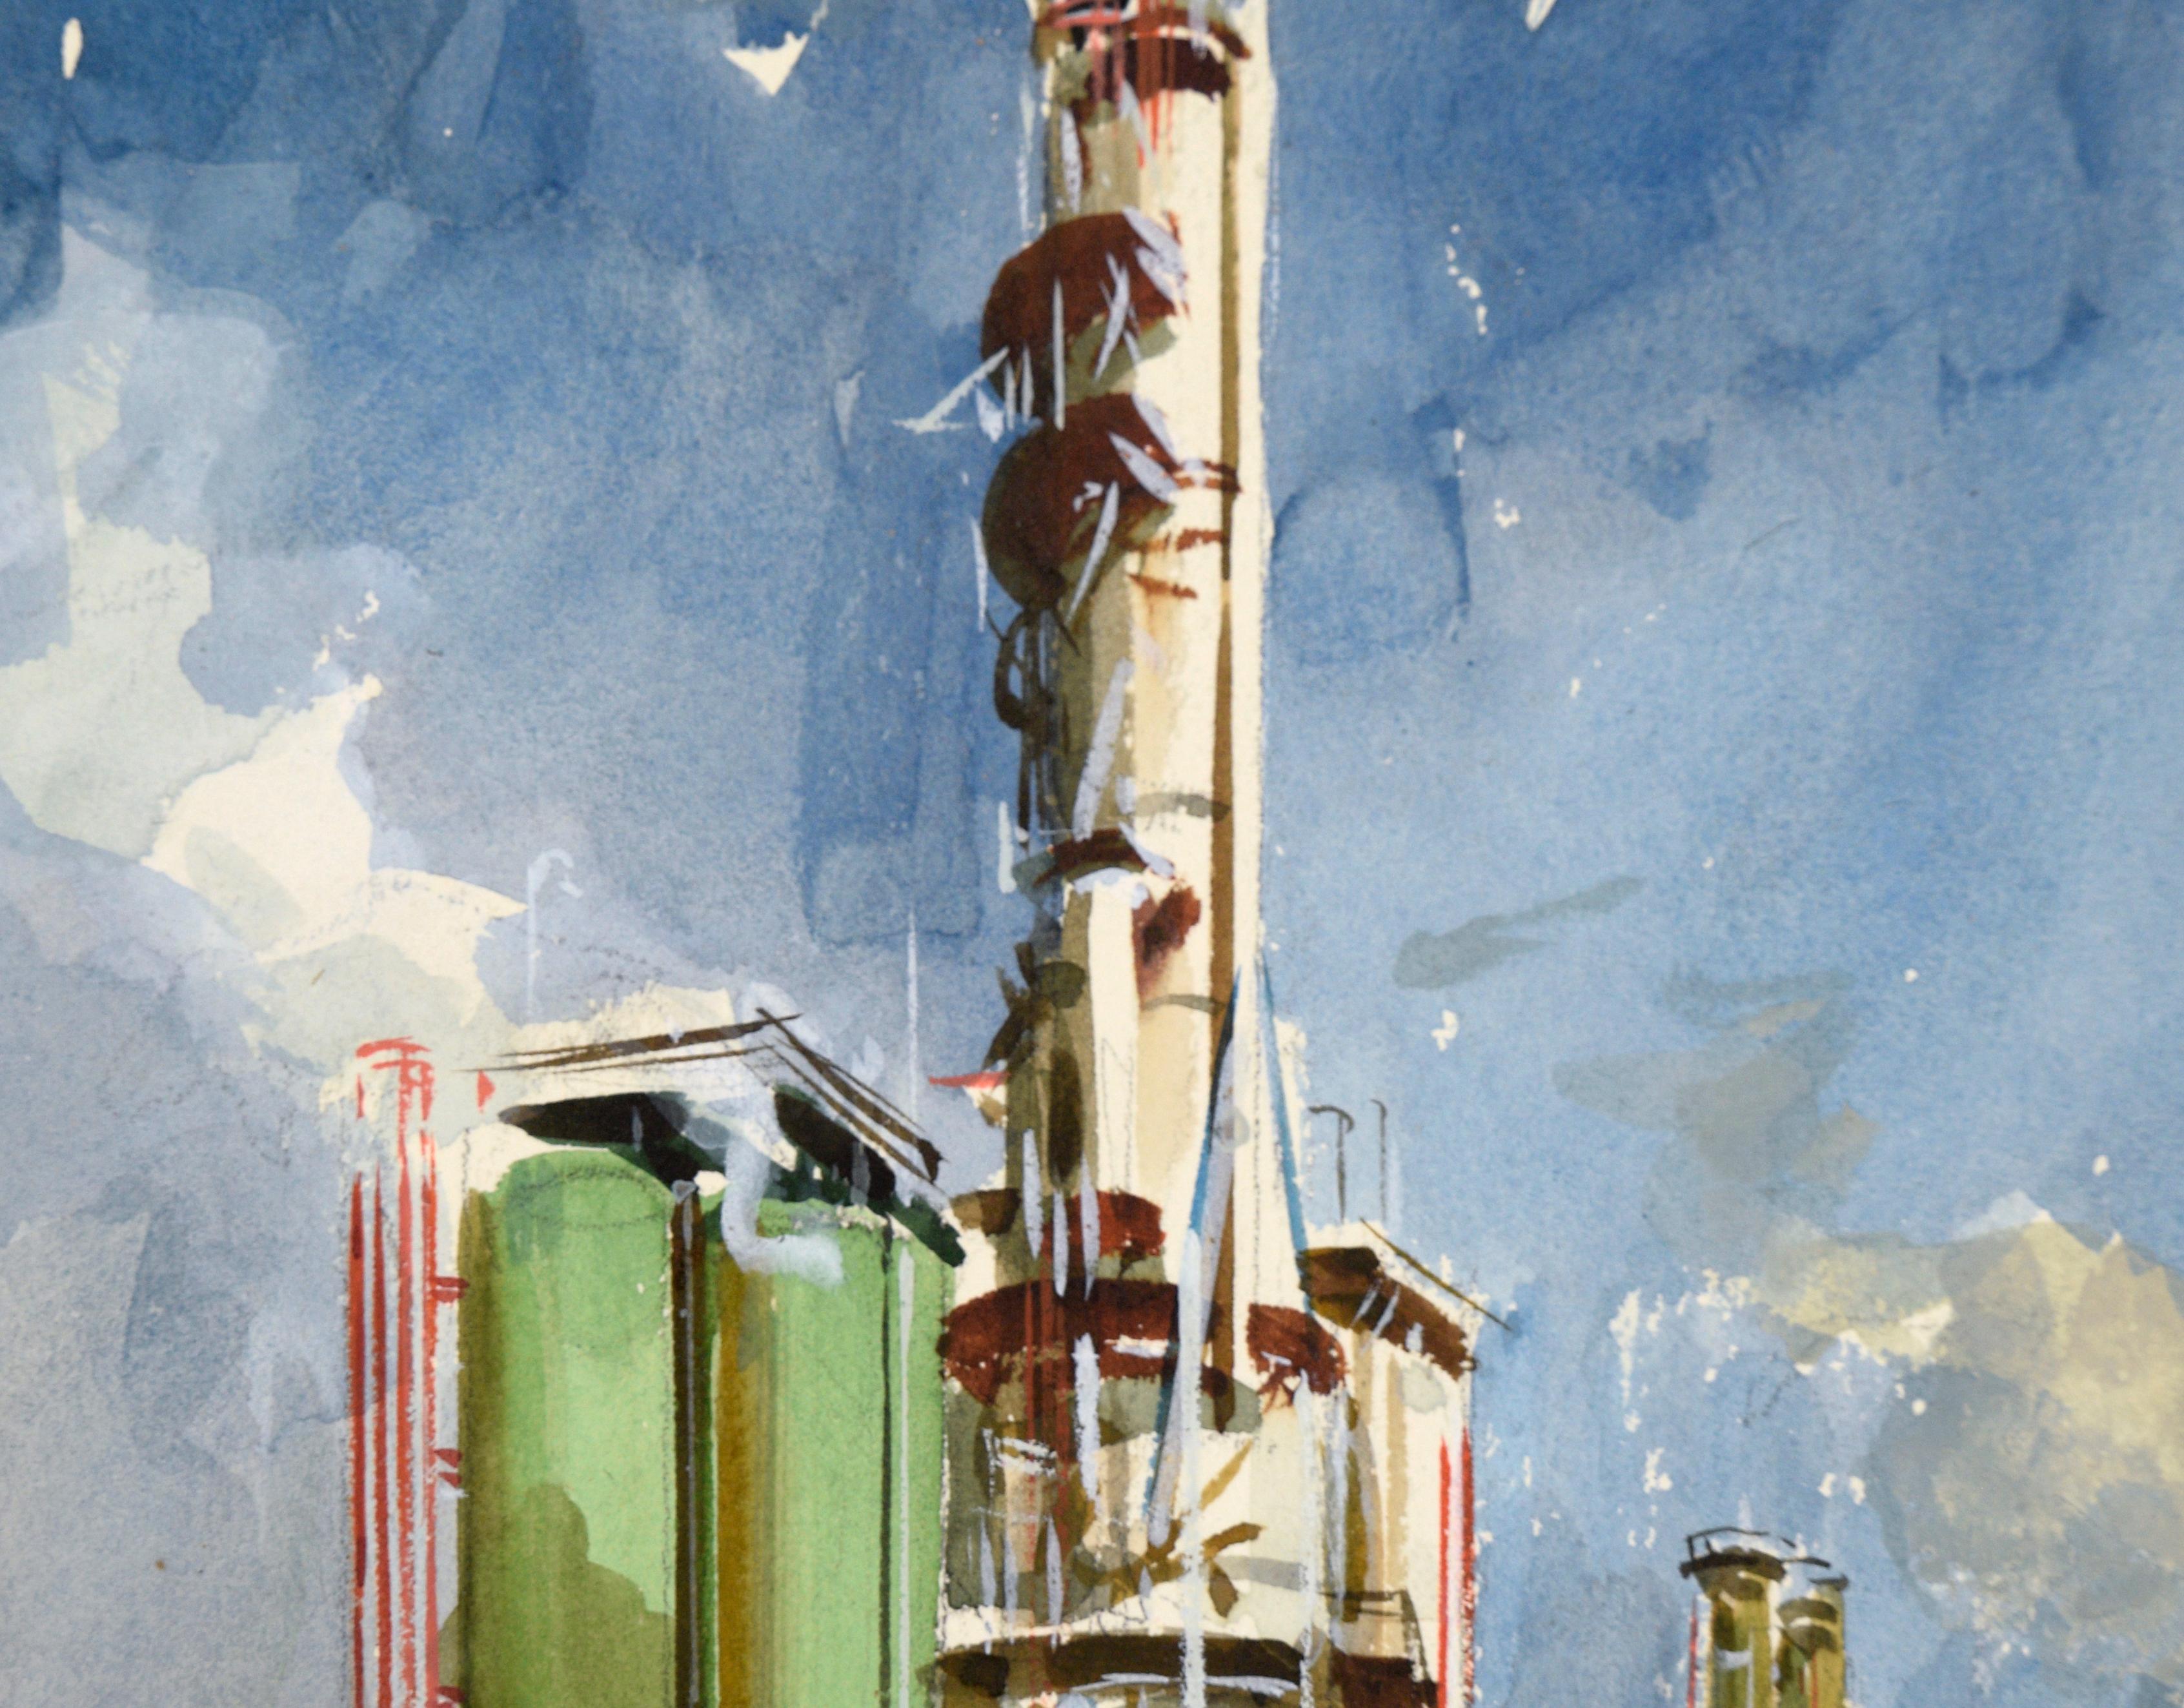 Smokestack at the Refinery – realistische industrielle Illustration in Gouache (Weiß), Figurative Painting, von Charles Kinghan